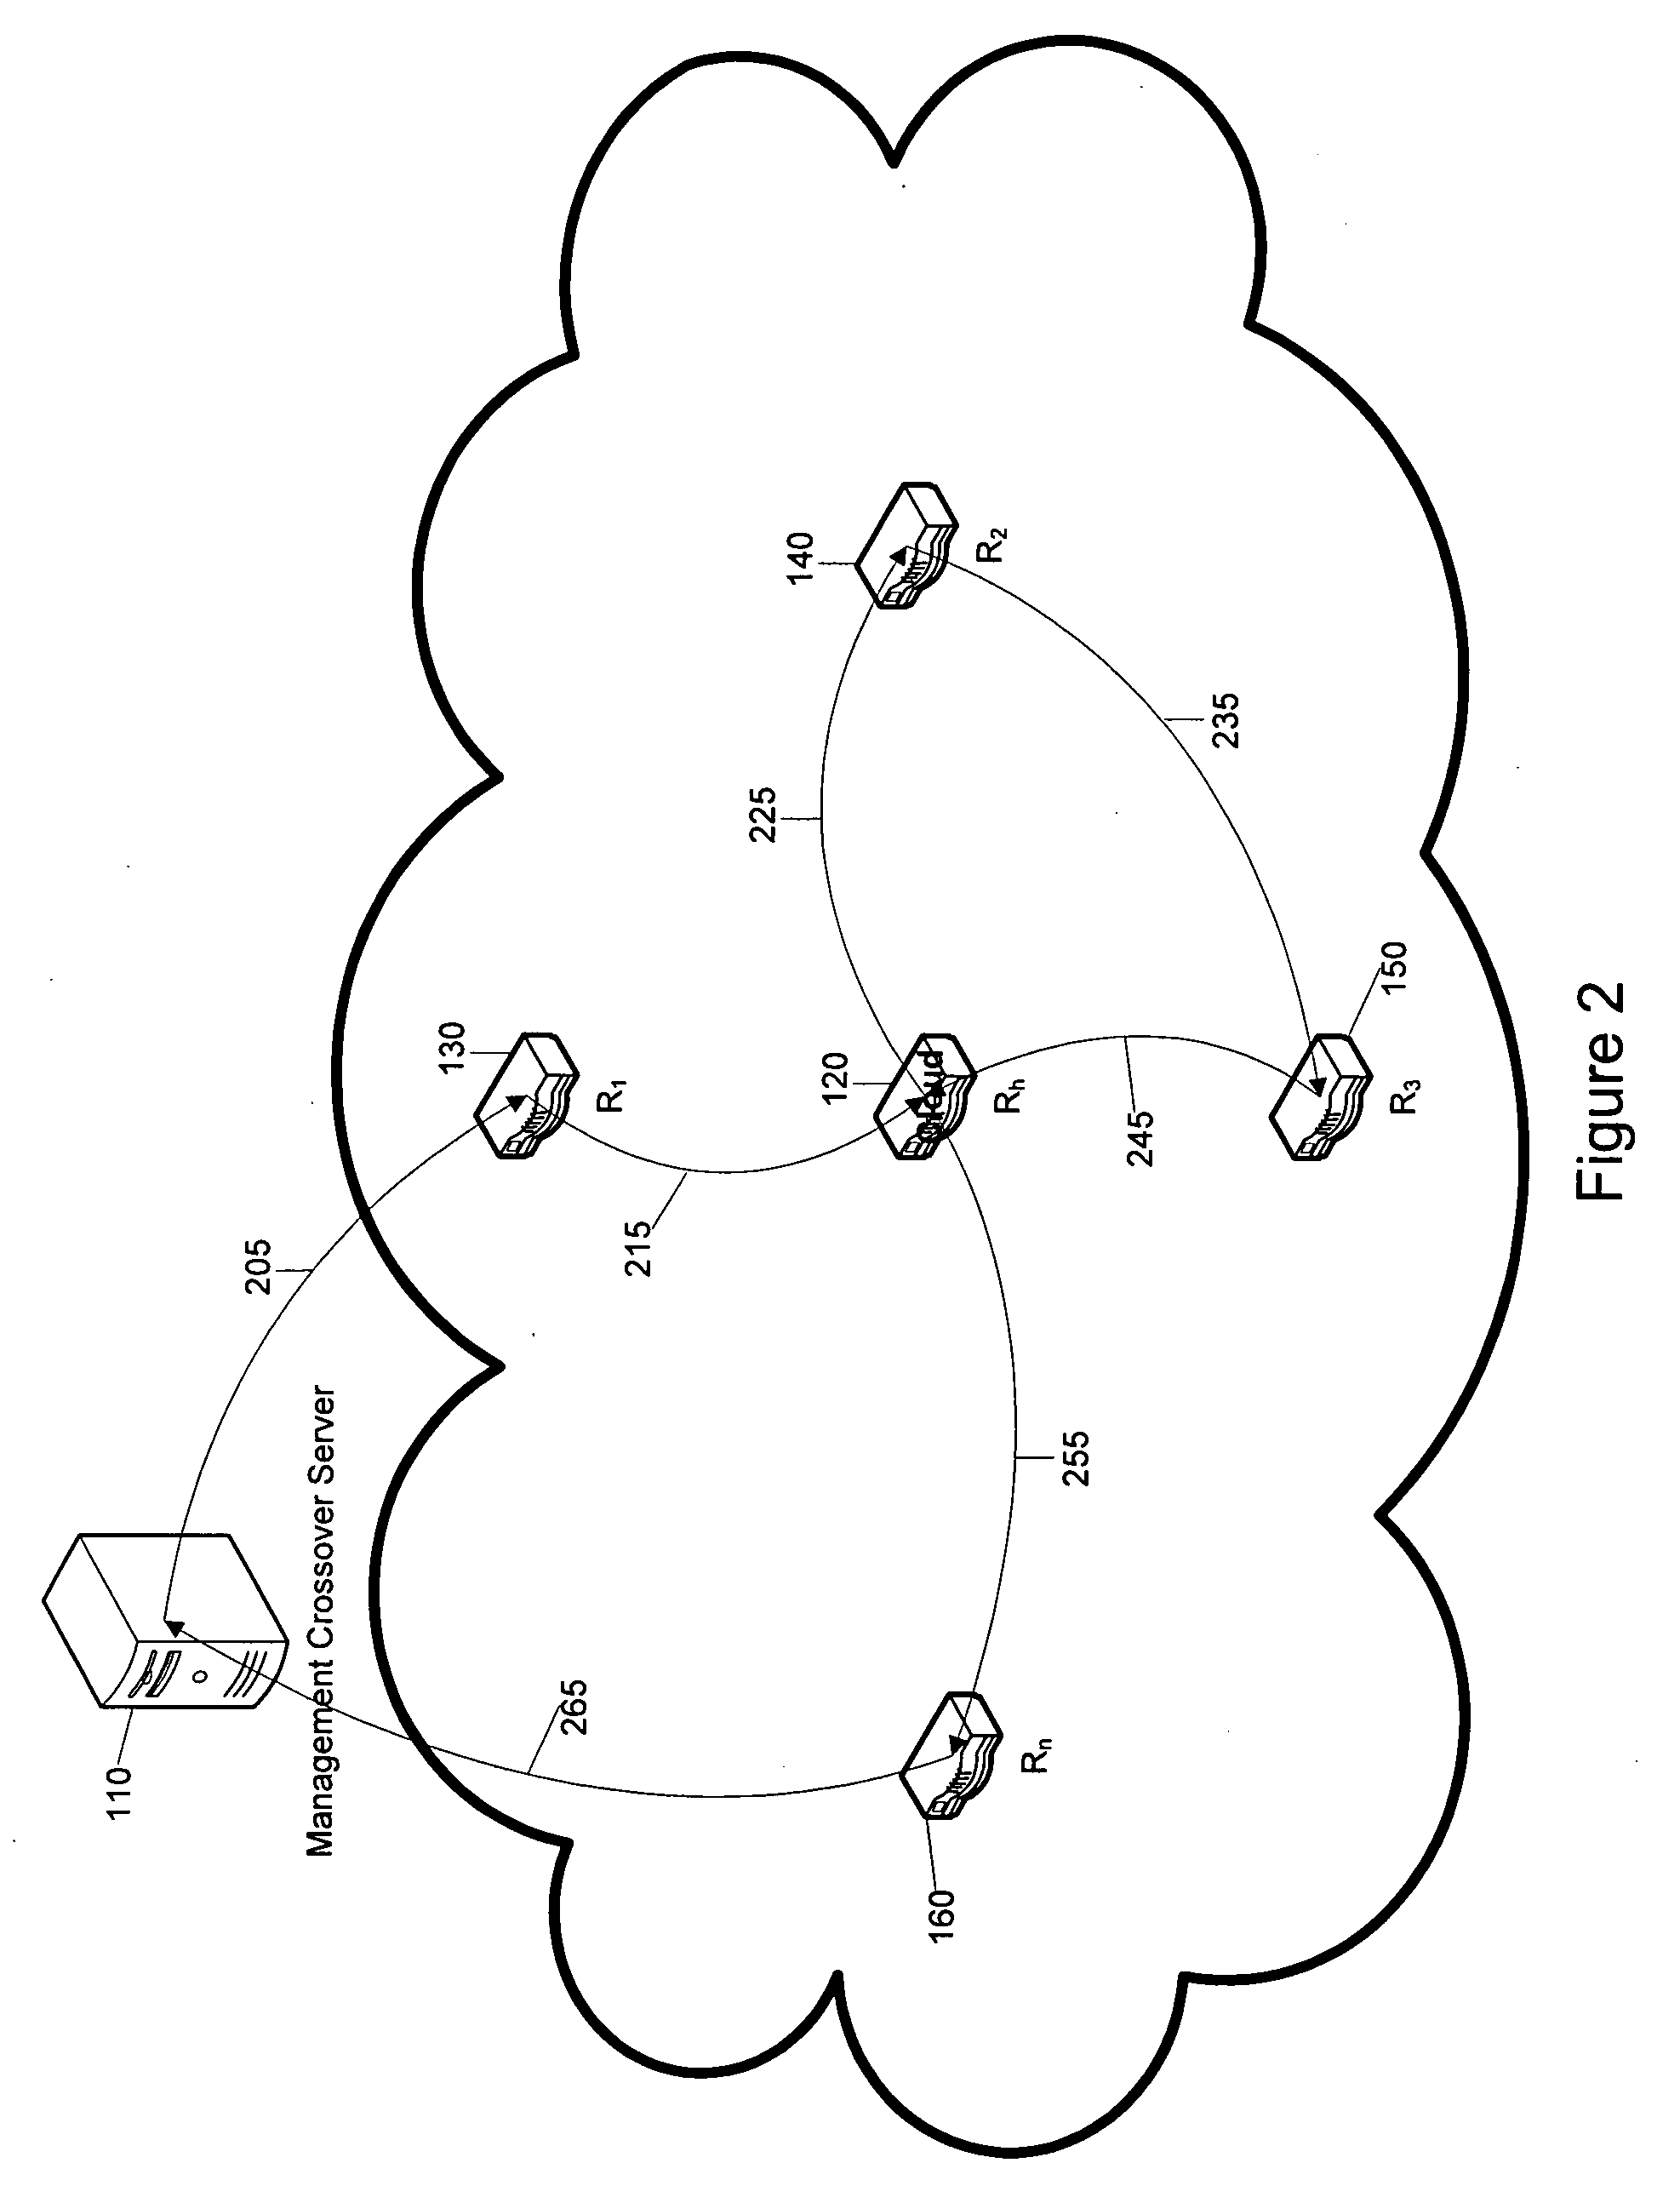 Network latency analysis packet and method